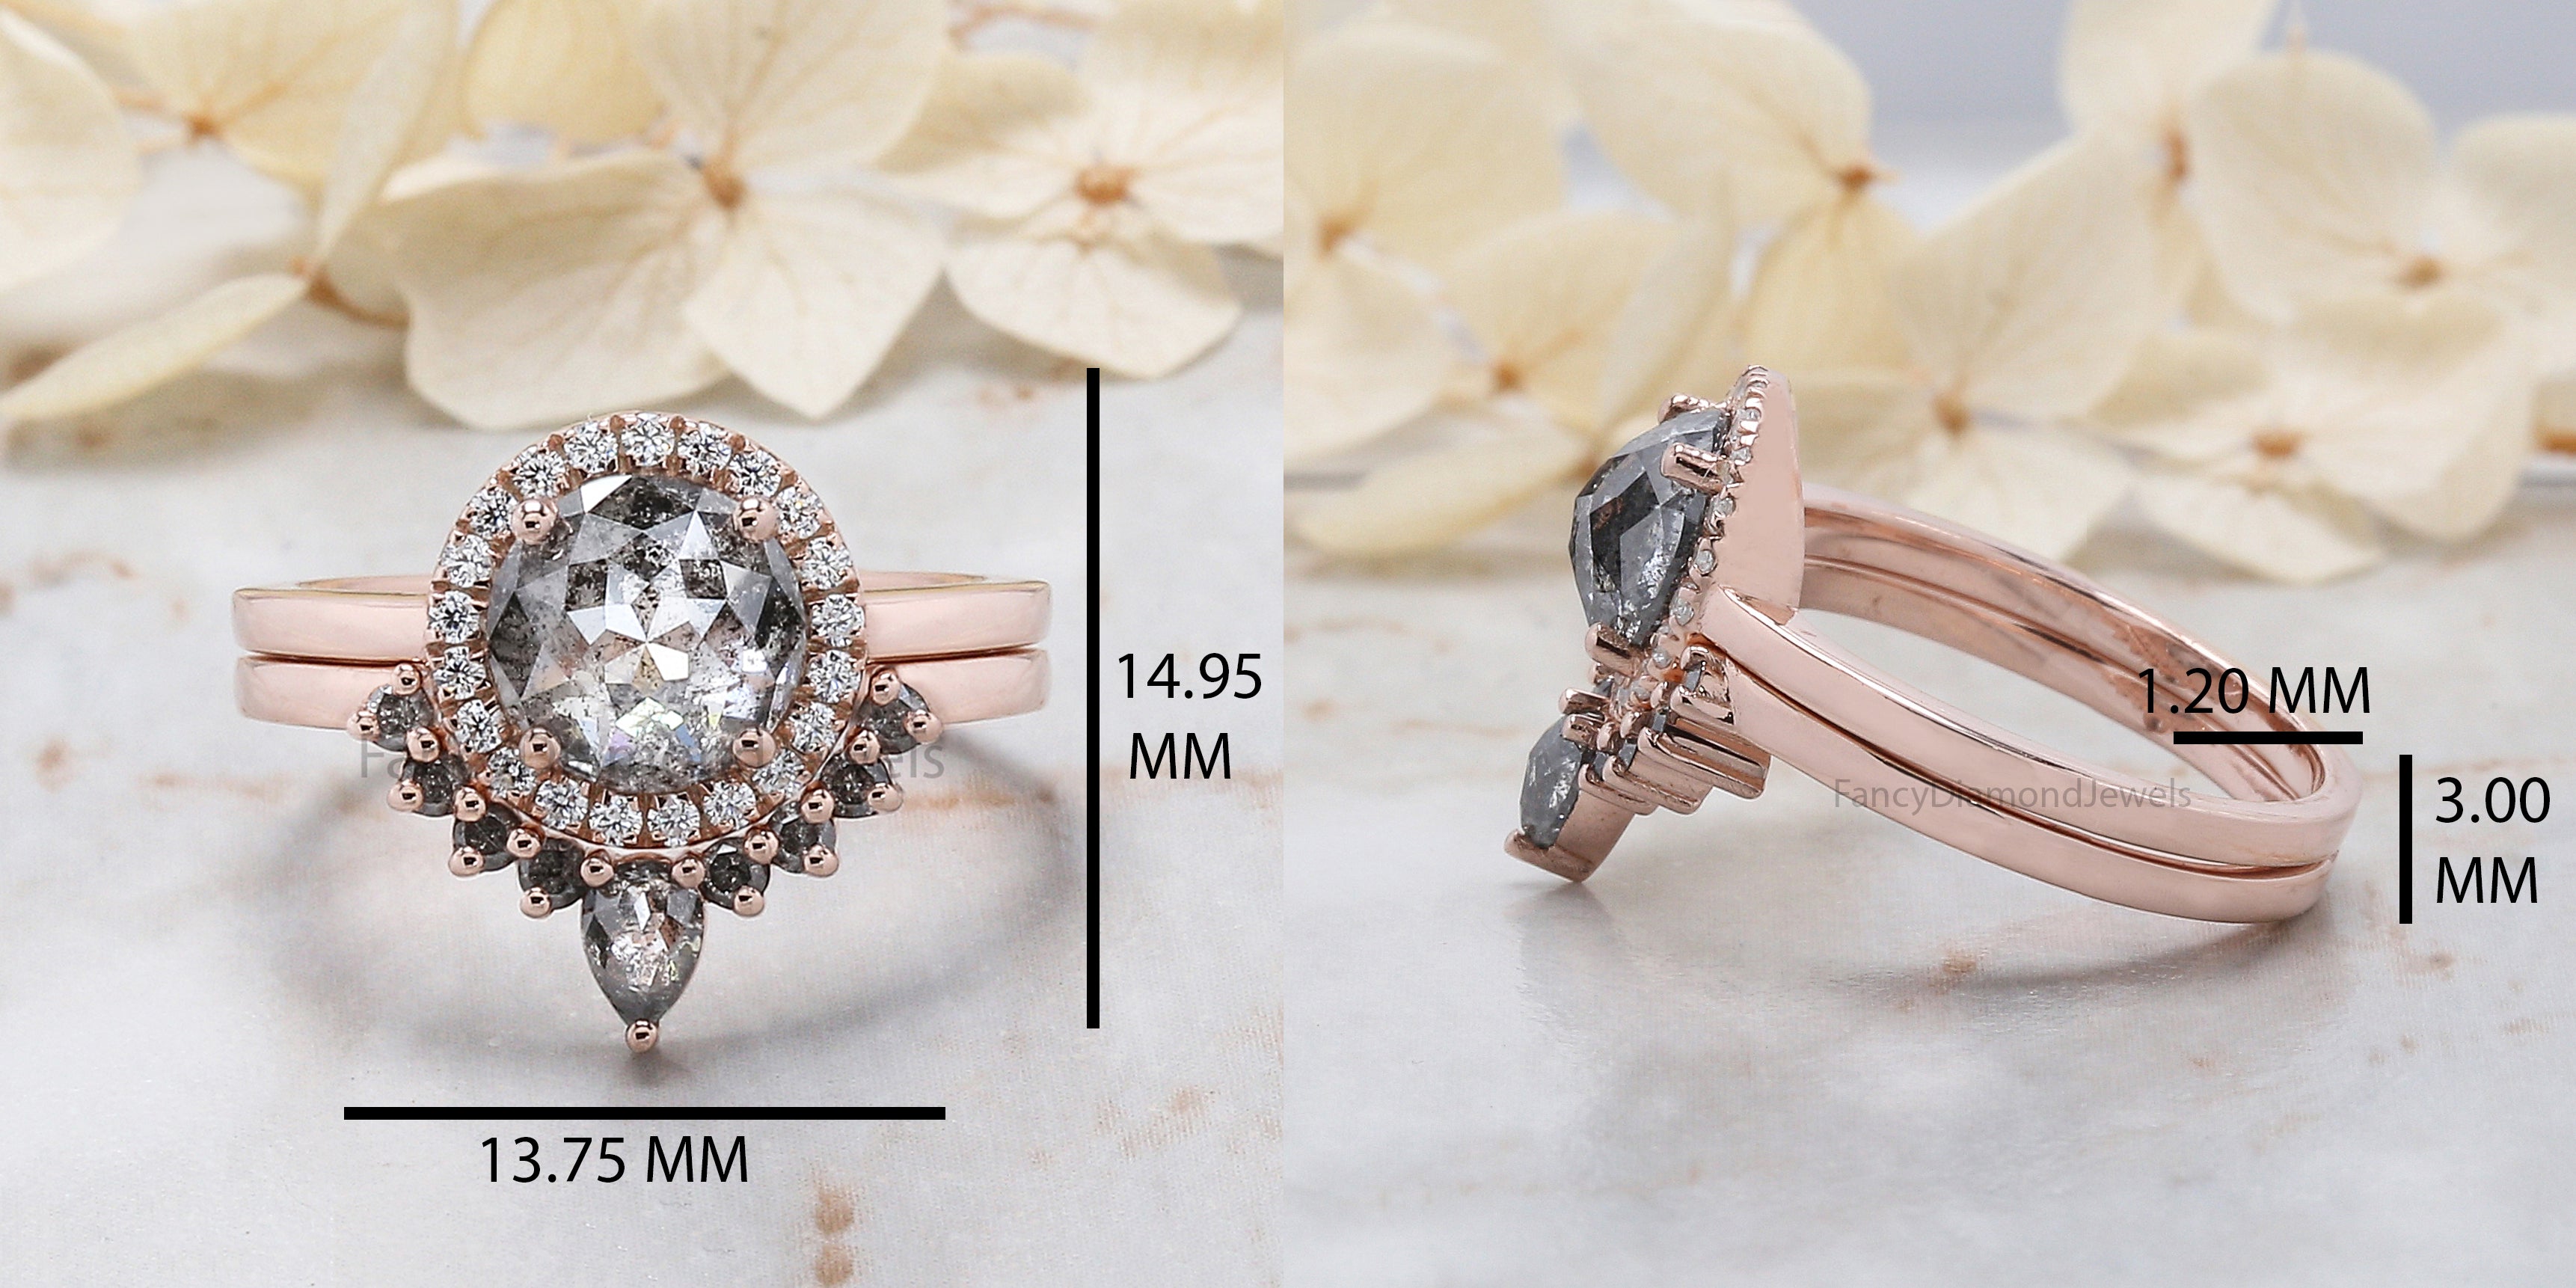 Round Rose Cut Salt And Pepper Diamond Ring 1.70 Ct 7.30 MM Round Shape Diamond Ring 14K Rose Gold Silver Engagement Ring Gift For Her QL882